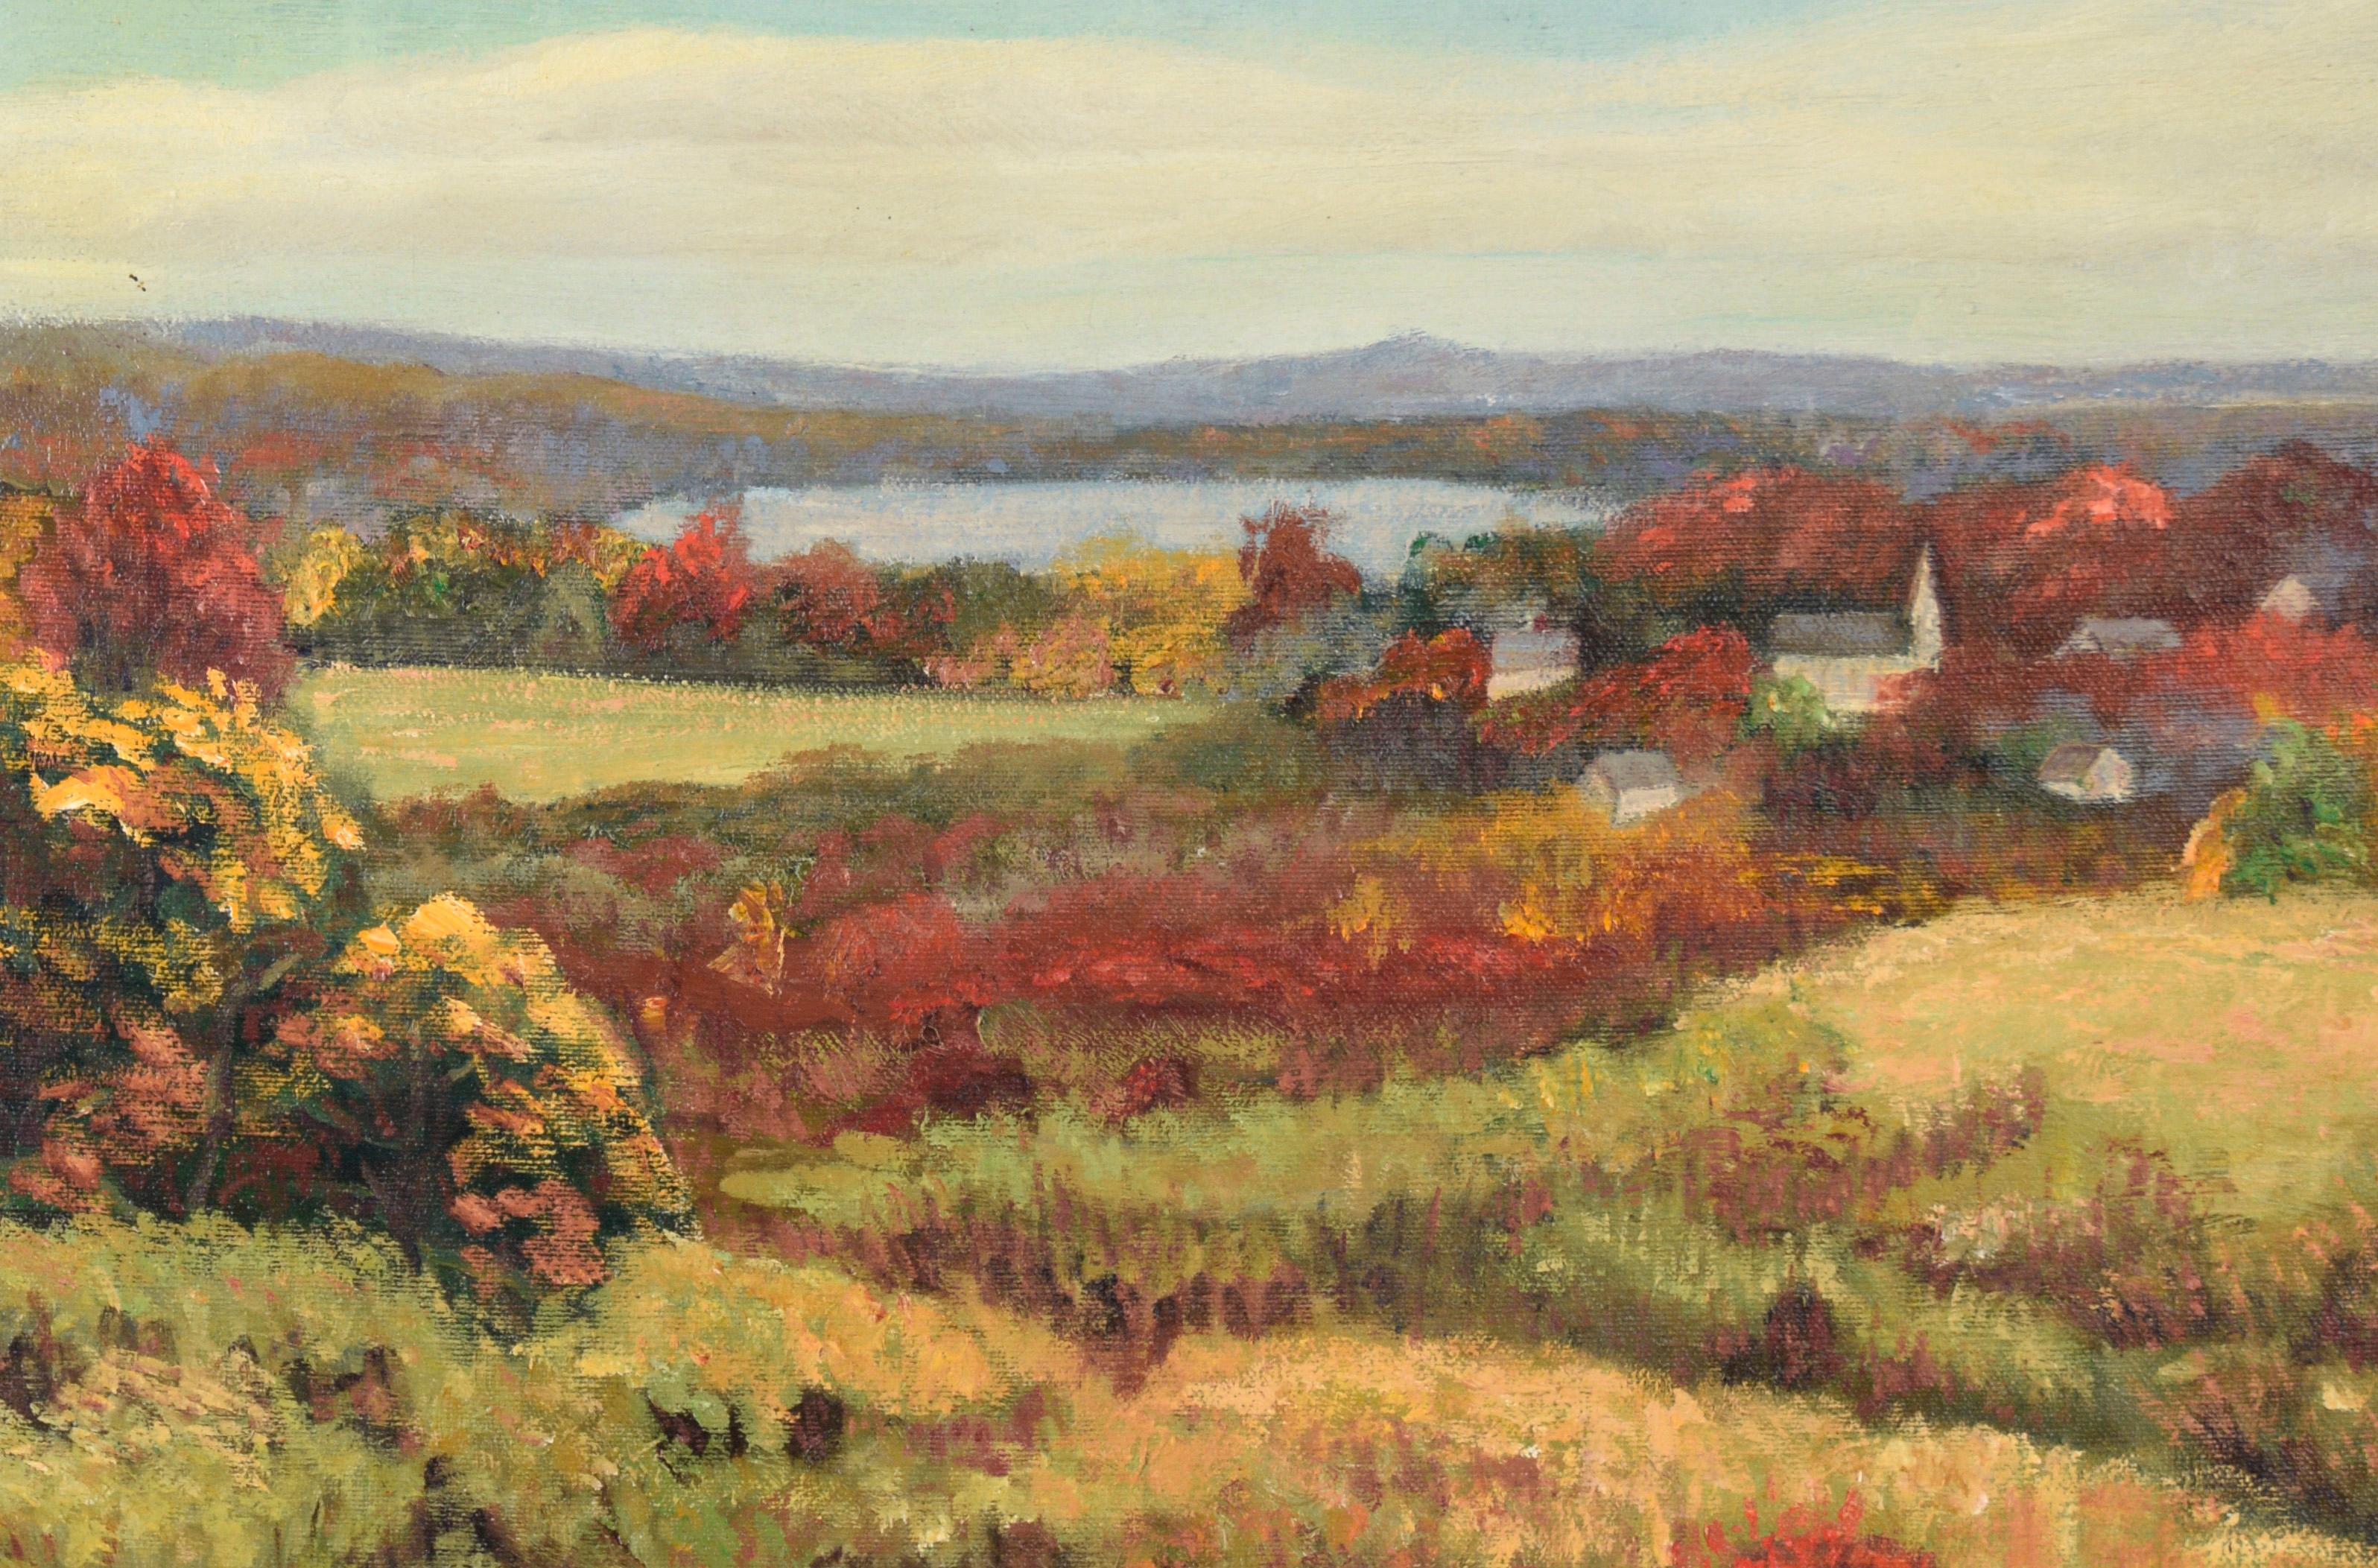 Poppy Fields Outside of Town - Landscape in Oil on Canvas - American Impressionist Painting by M. Buckley